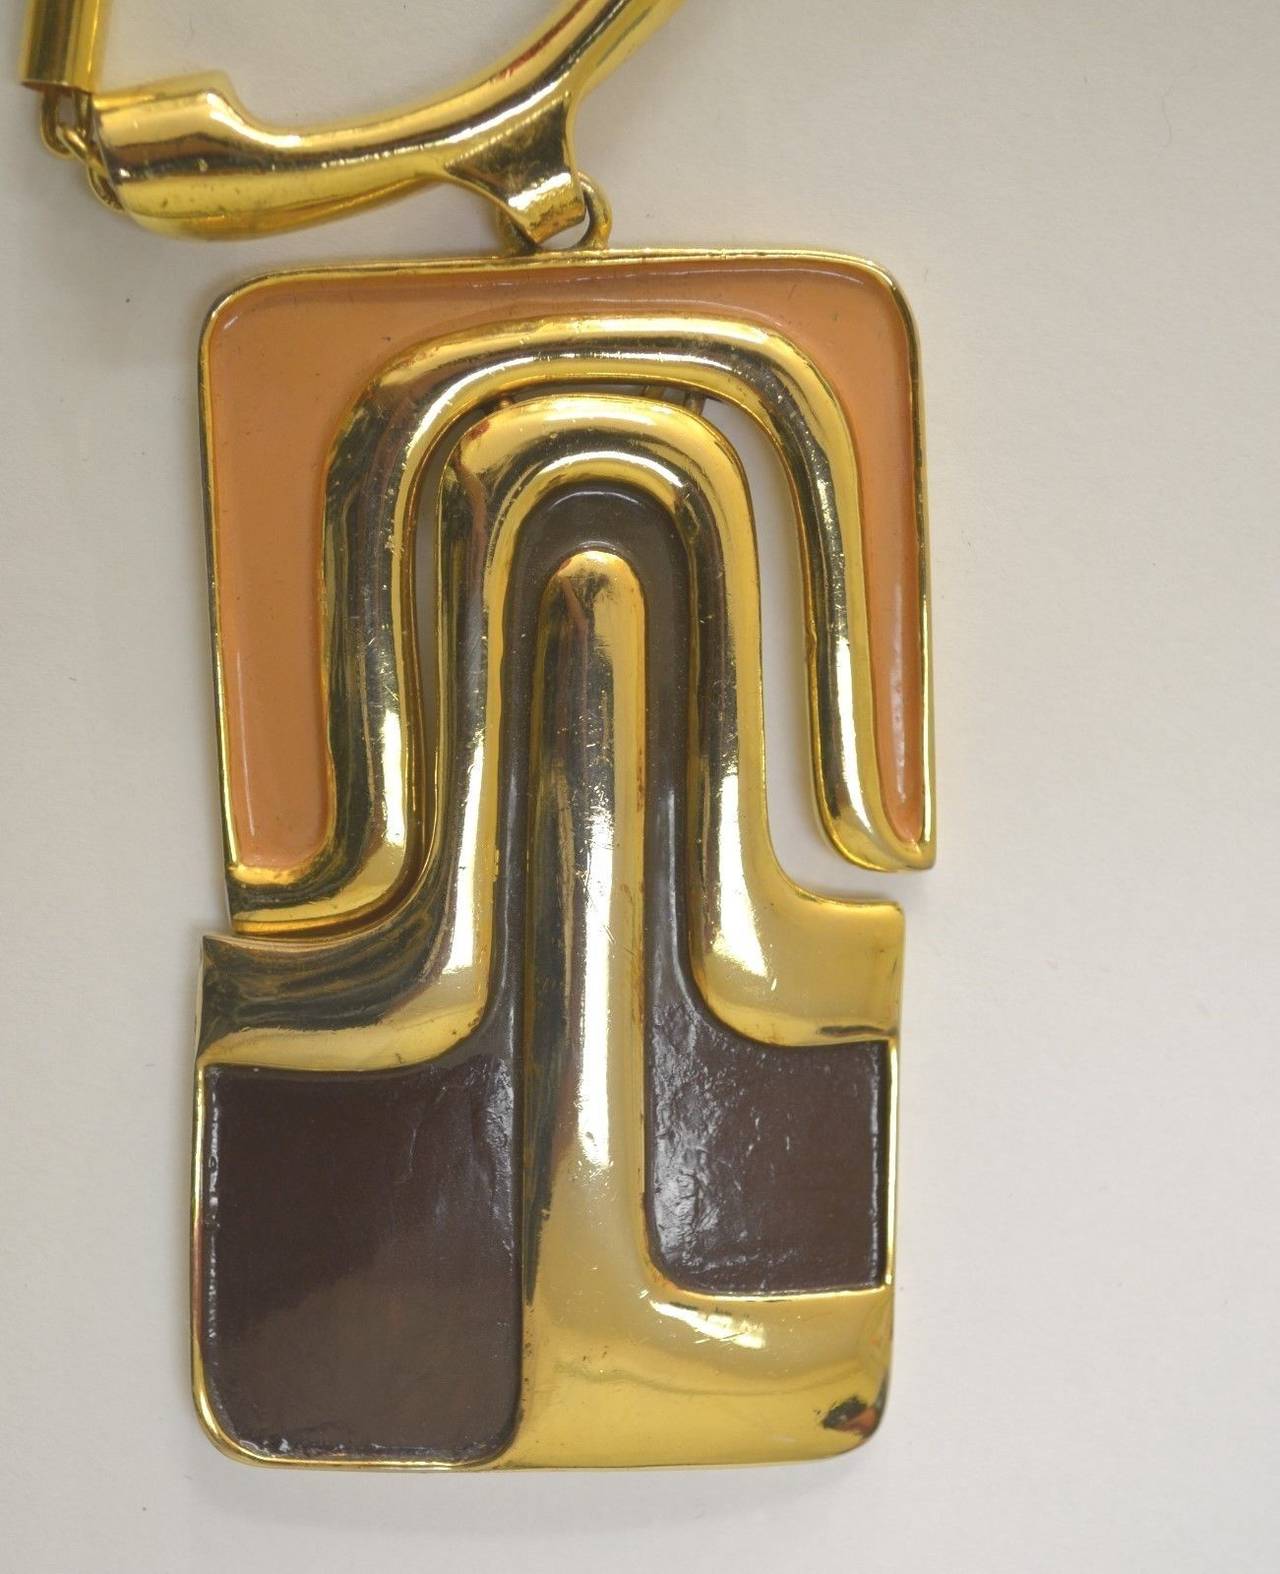 Vintage Pierre Cardin Necklace has a large pendant with brown and peach detail to the gold-tone metal (reticulated moving piece), and tube metal chain with a spring ring closure.

Measurements:
Length - 16'' chain 
Pendant - 3.75'' long